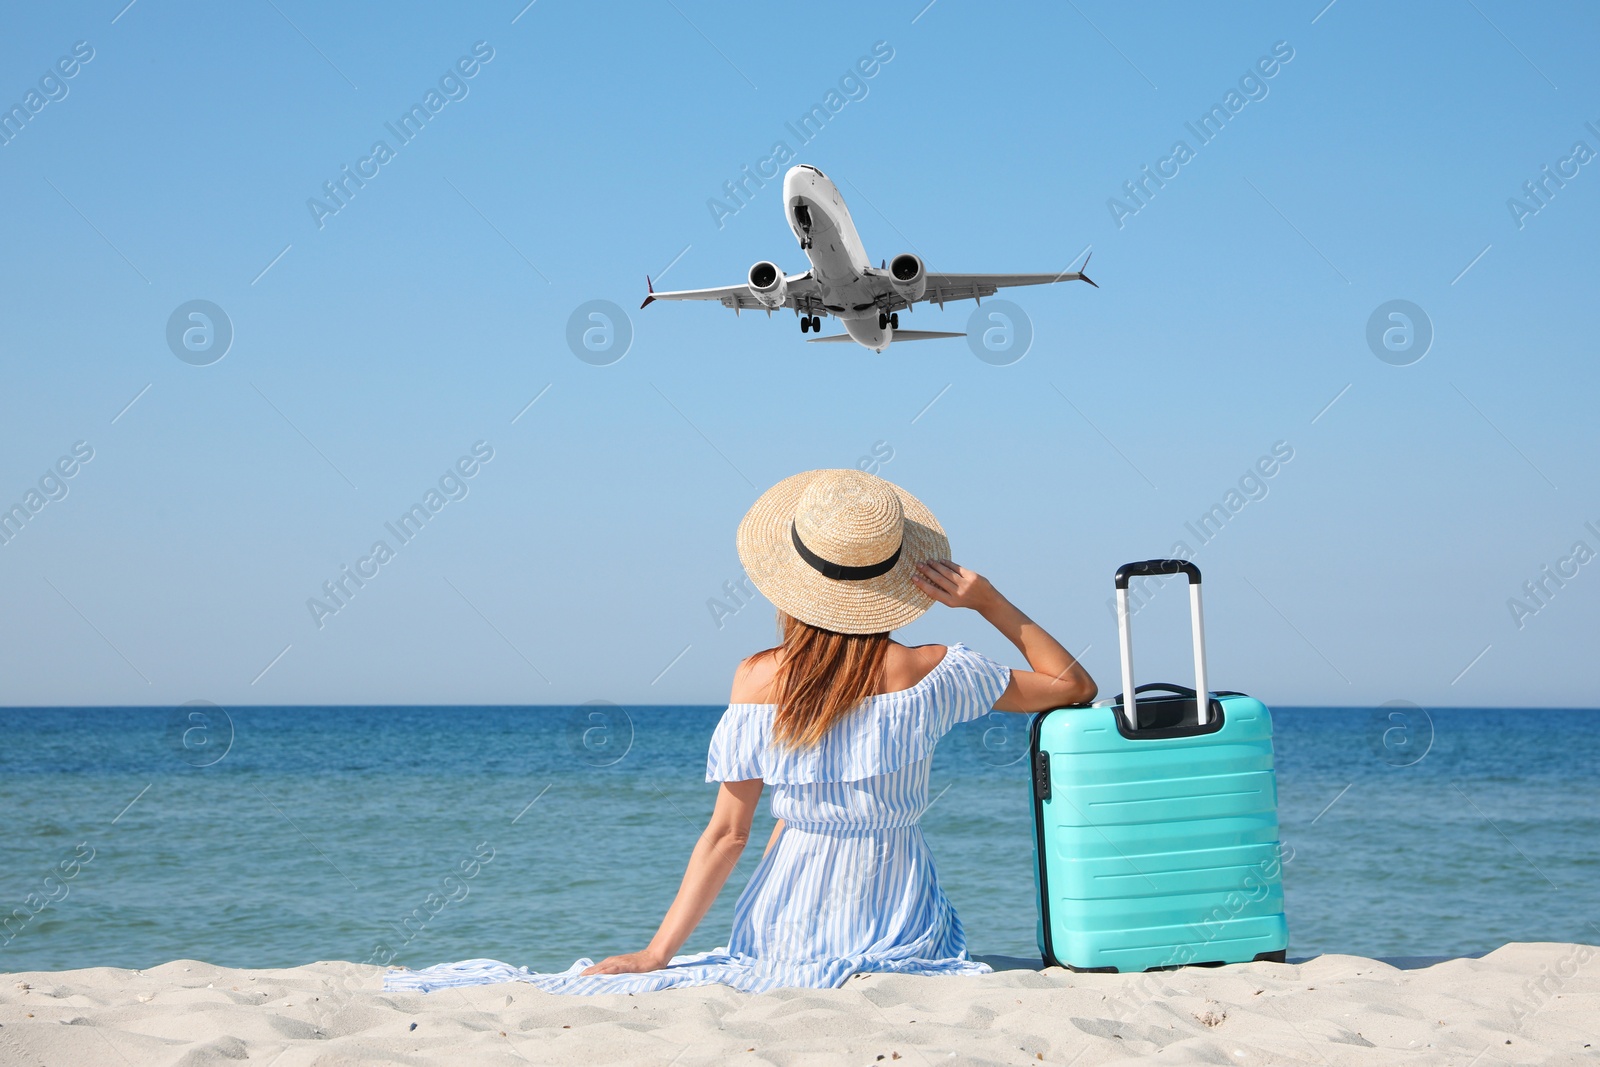 Image of Woman with suitcase on sandy beach looking at airplane flying in sky, back view